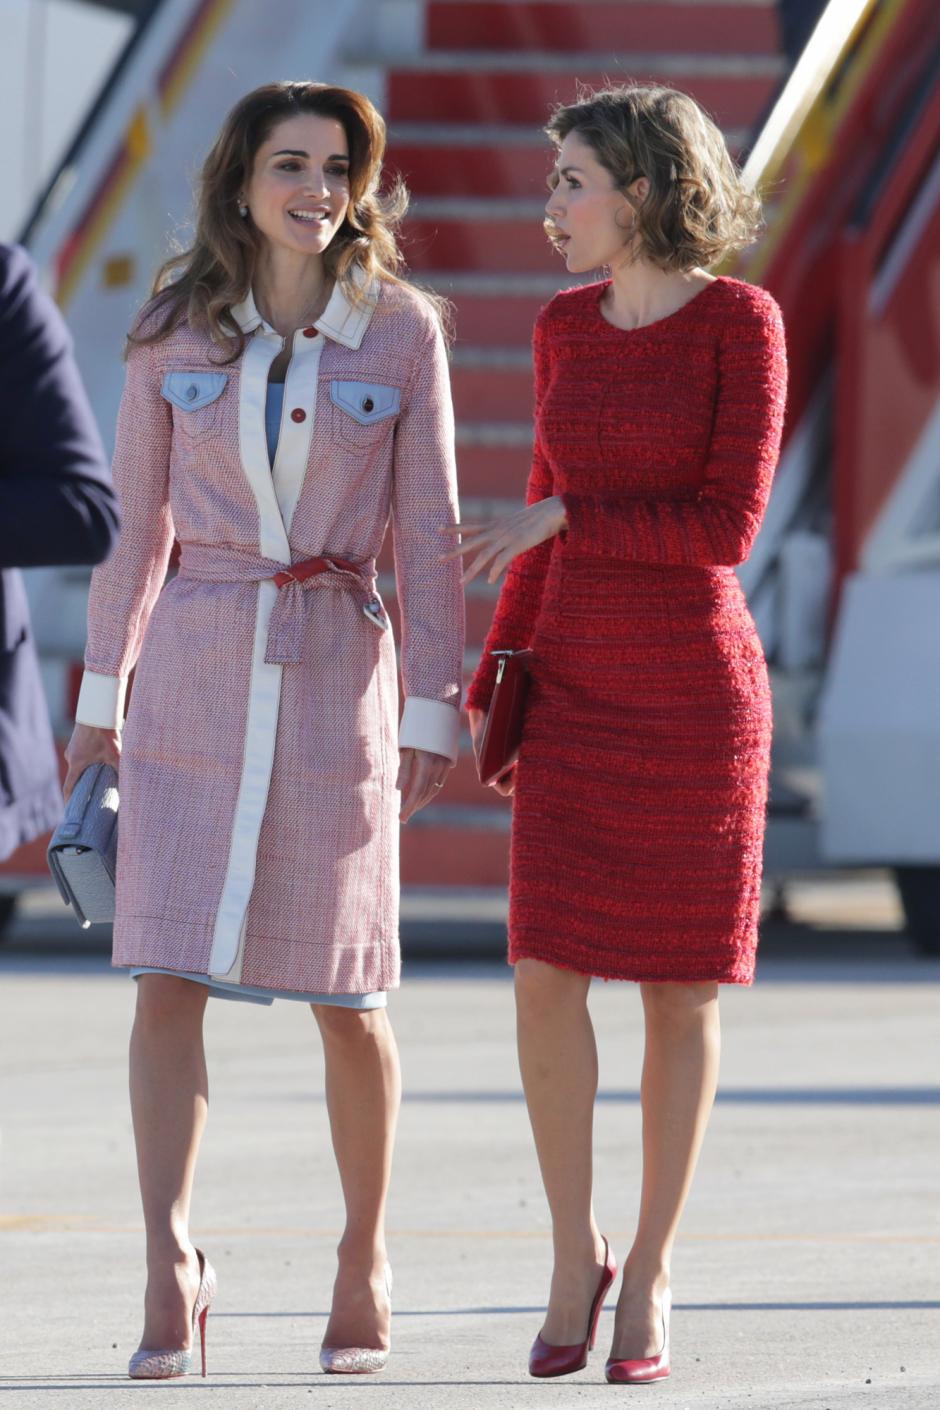 Spanish Queen Letizia Ortiz attends of welcome ceremony to Queen Rania of Jordan at the airport in Madrid, on Thursday 19th November, 2015.